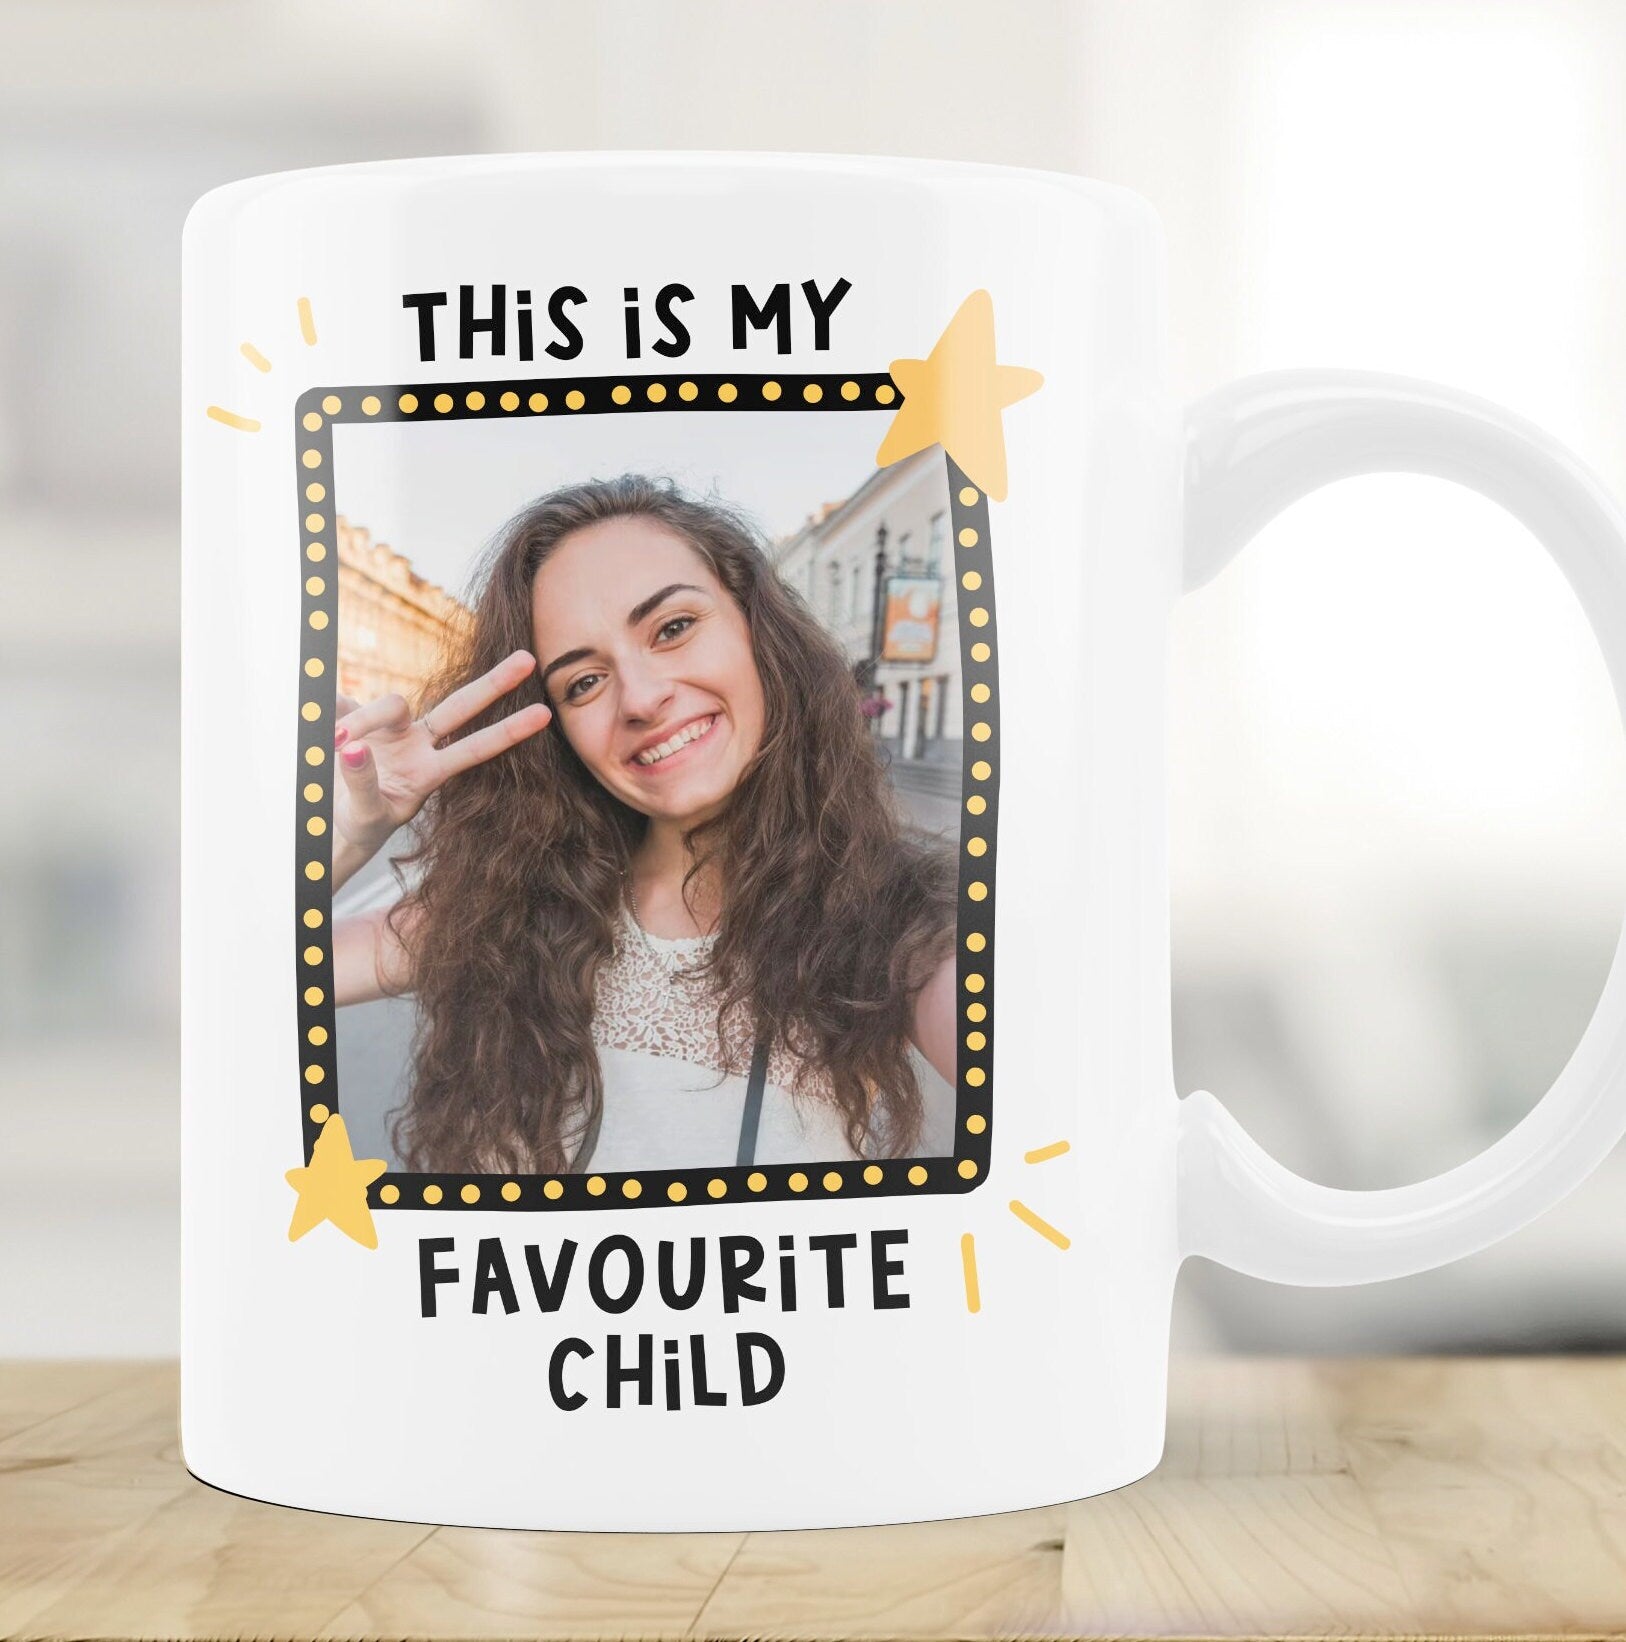 Fathers Day Gift, Personalised Photo Funny Favourite Child Mug, Funny Fathers Day Gift, Funny Cup for Dad, Funny Birthday Gift Dad, Father's